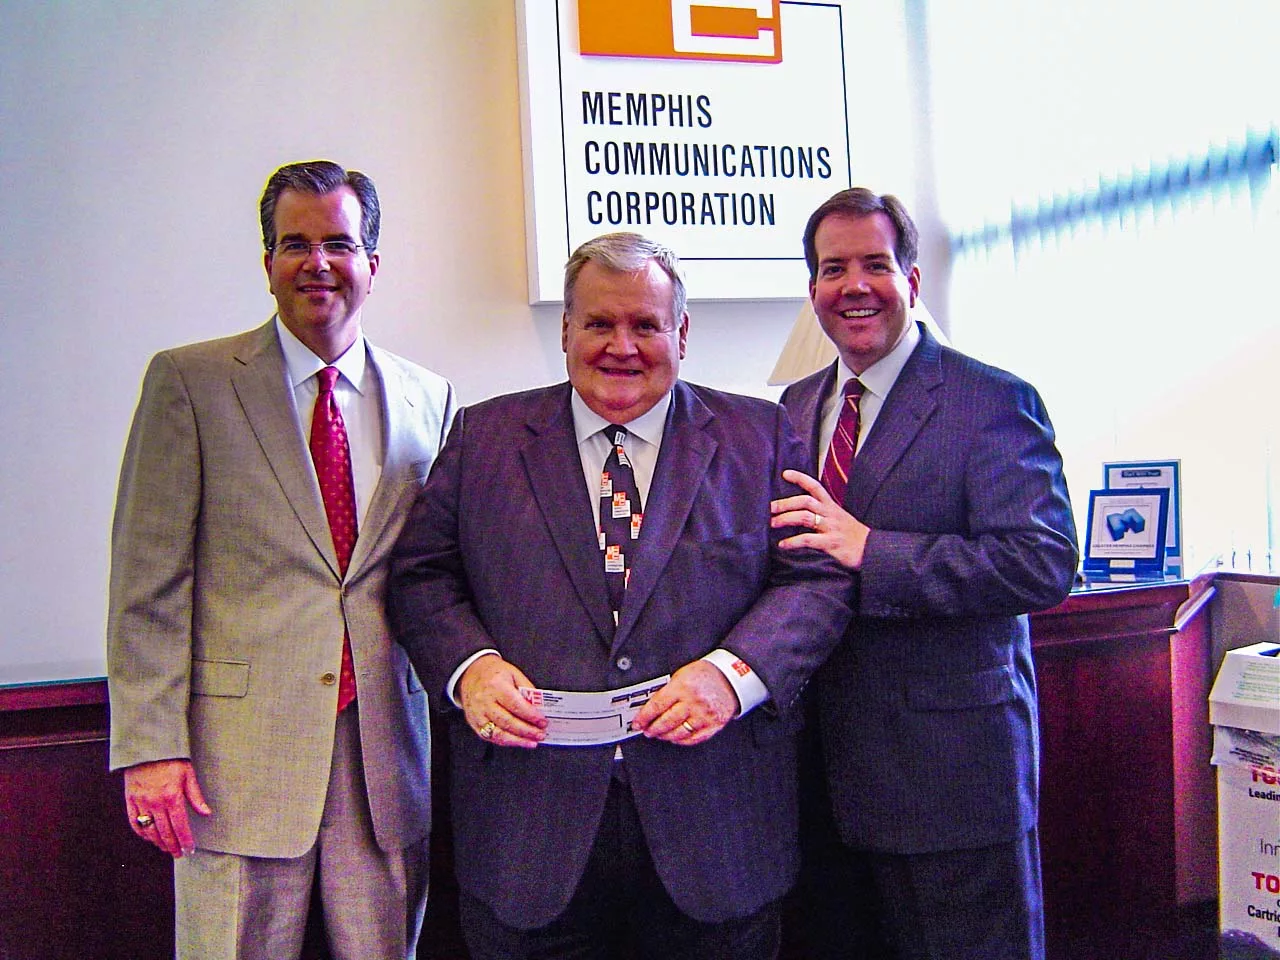 Scot (left) and Shane (right) present Dean (middle) with the first check for the purchase of Memphis Communications Corporation